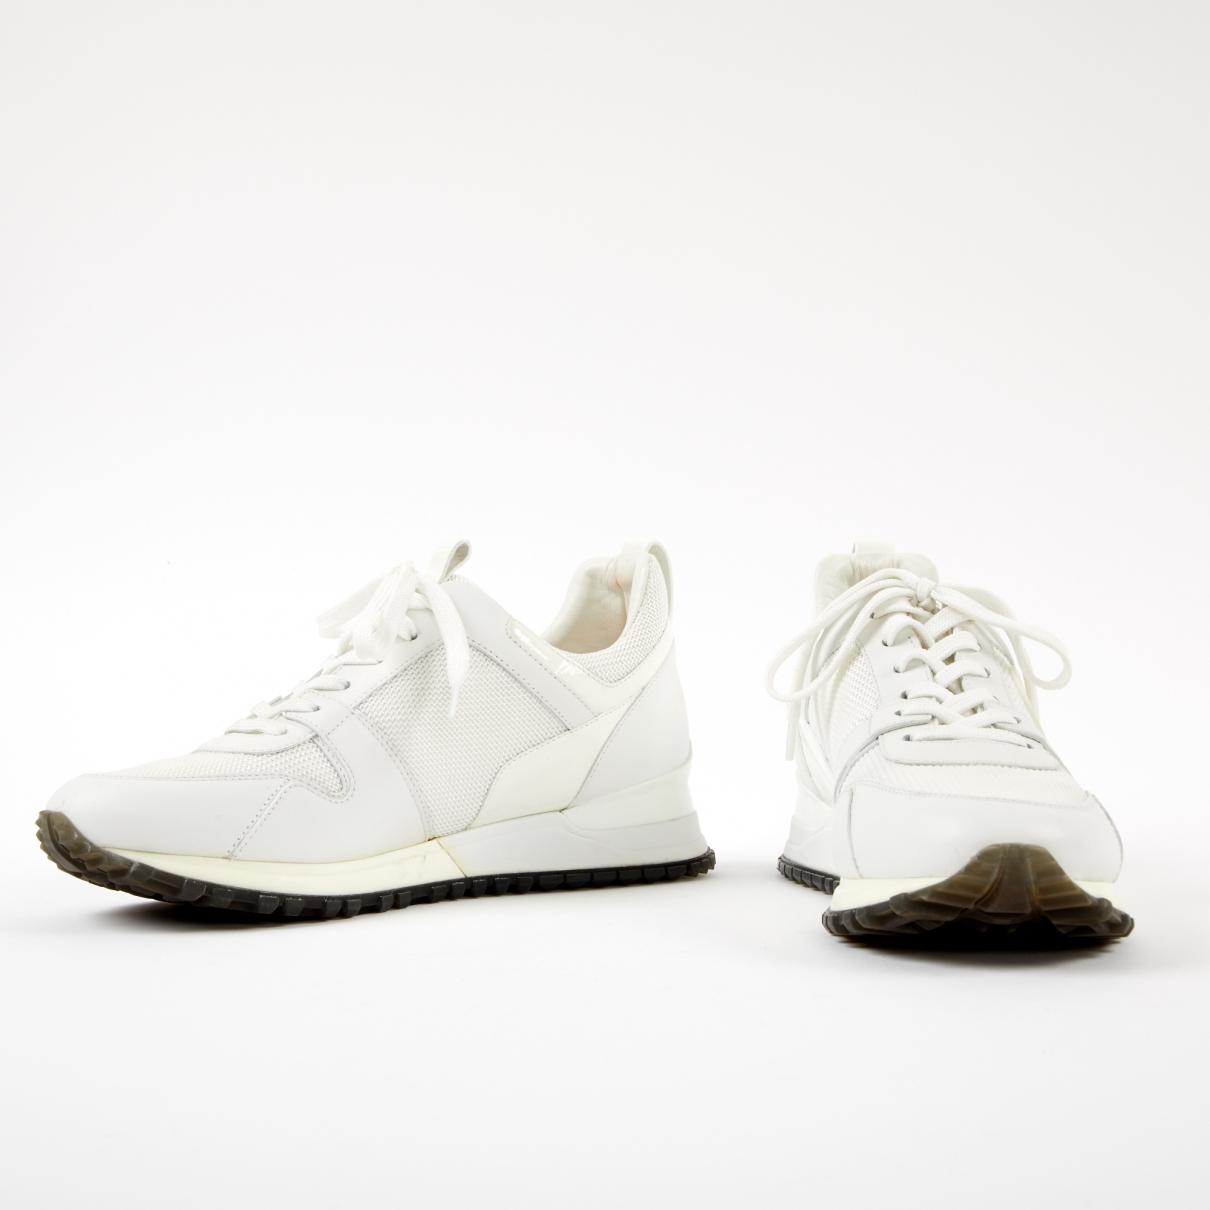 Louis Vuitton Run Away White Leather Trainers in White - Lyst